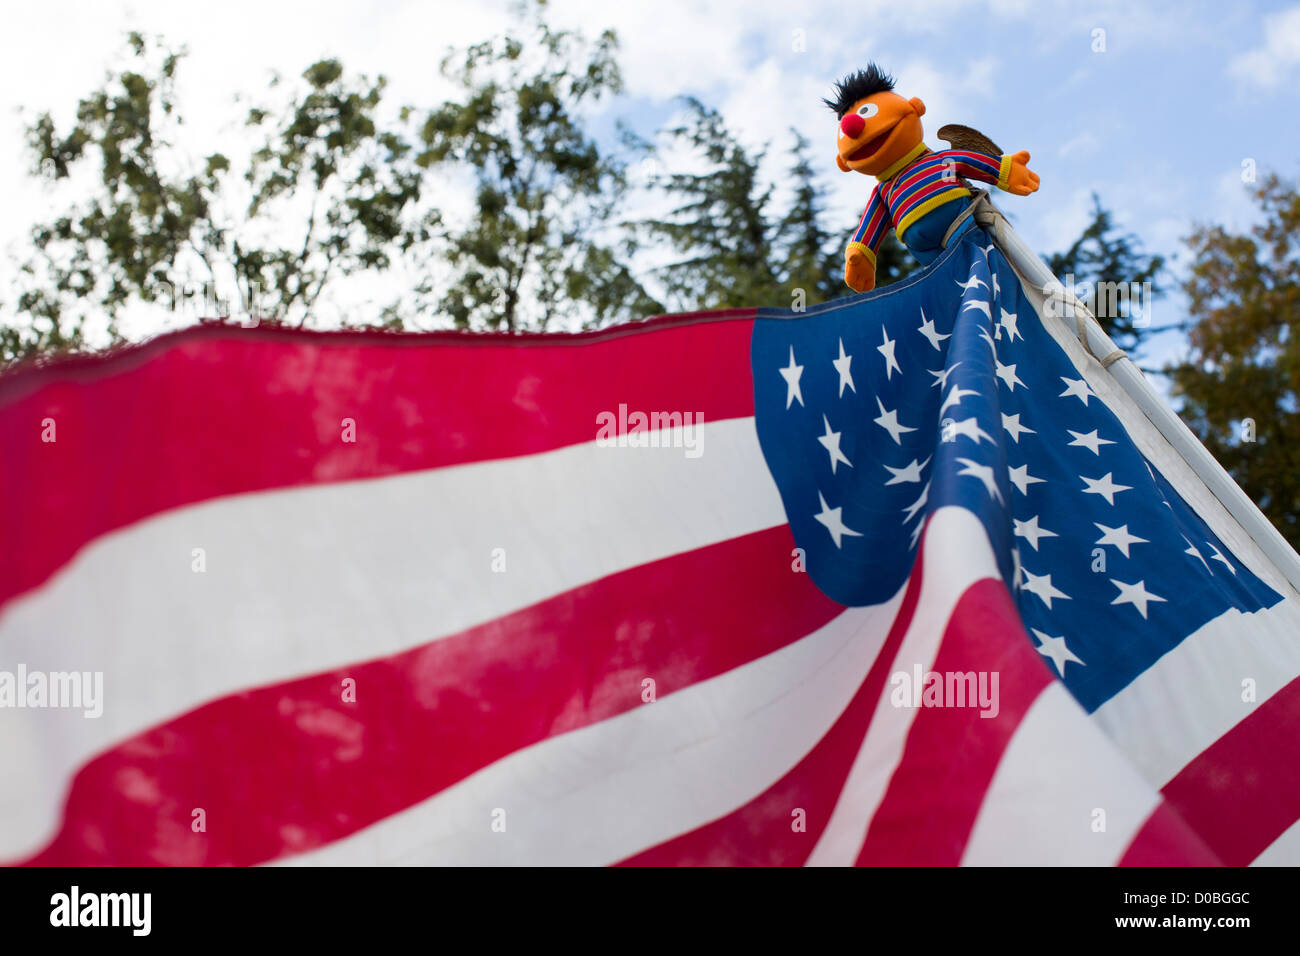 The Million Puppet March in Washington, D.C. Stock Photo